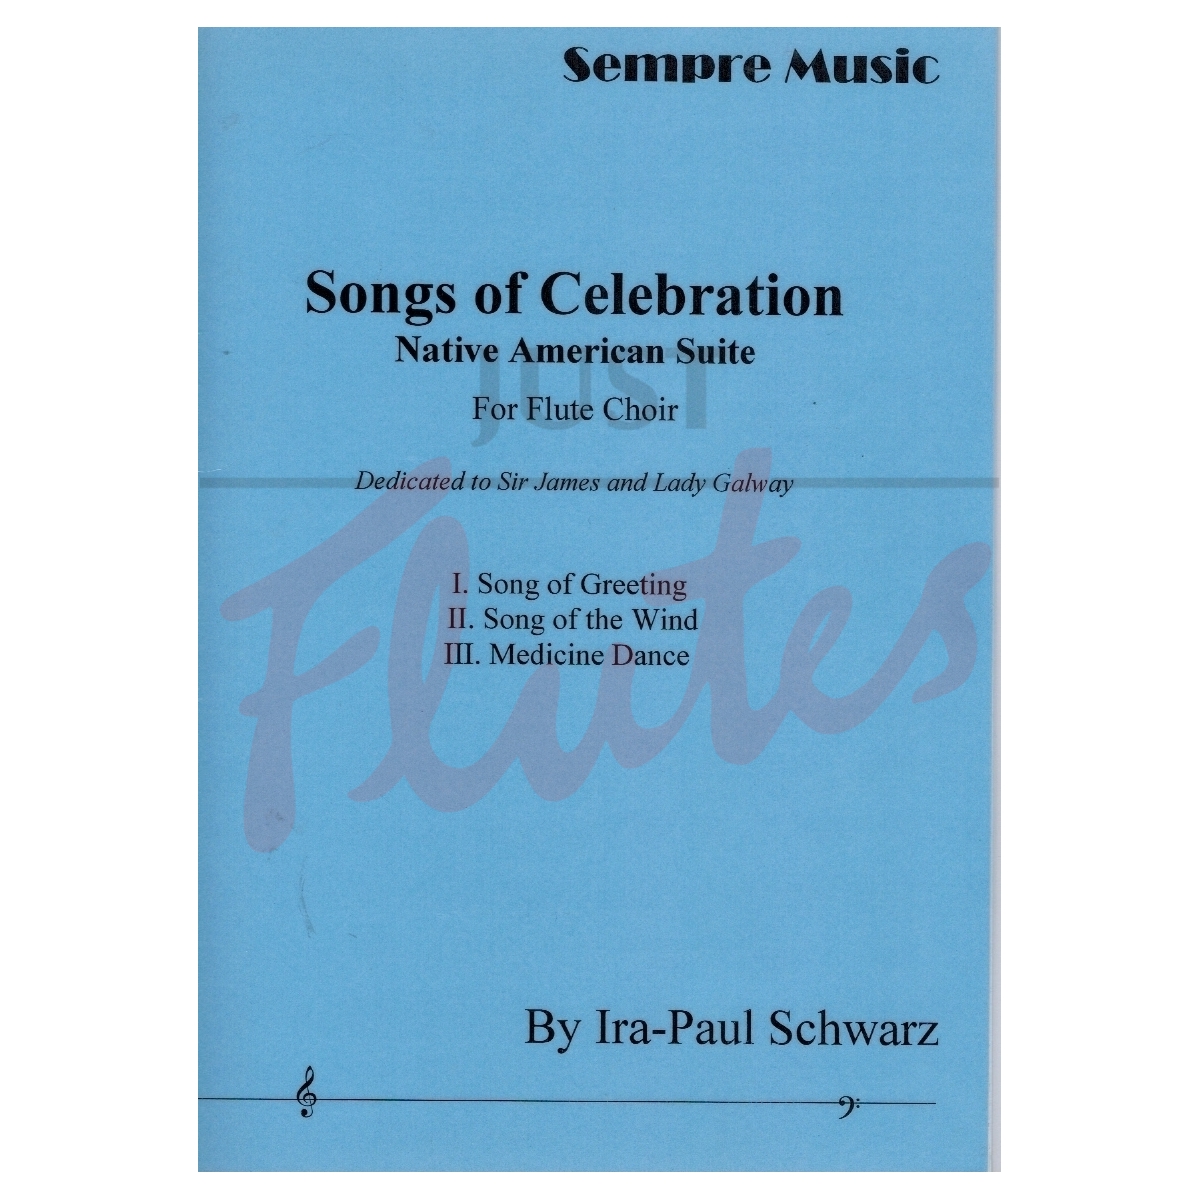 Songs of Celebration - Native American Suite